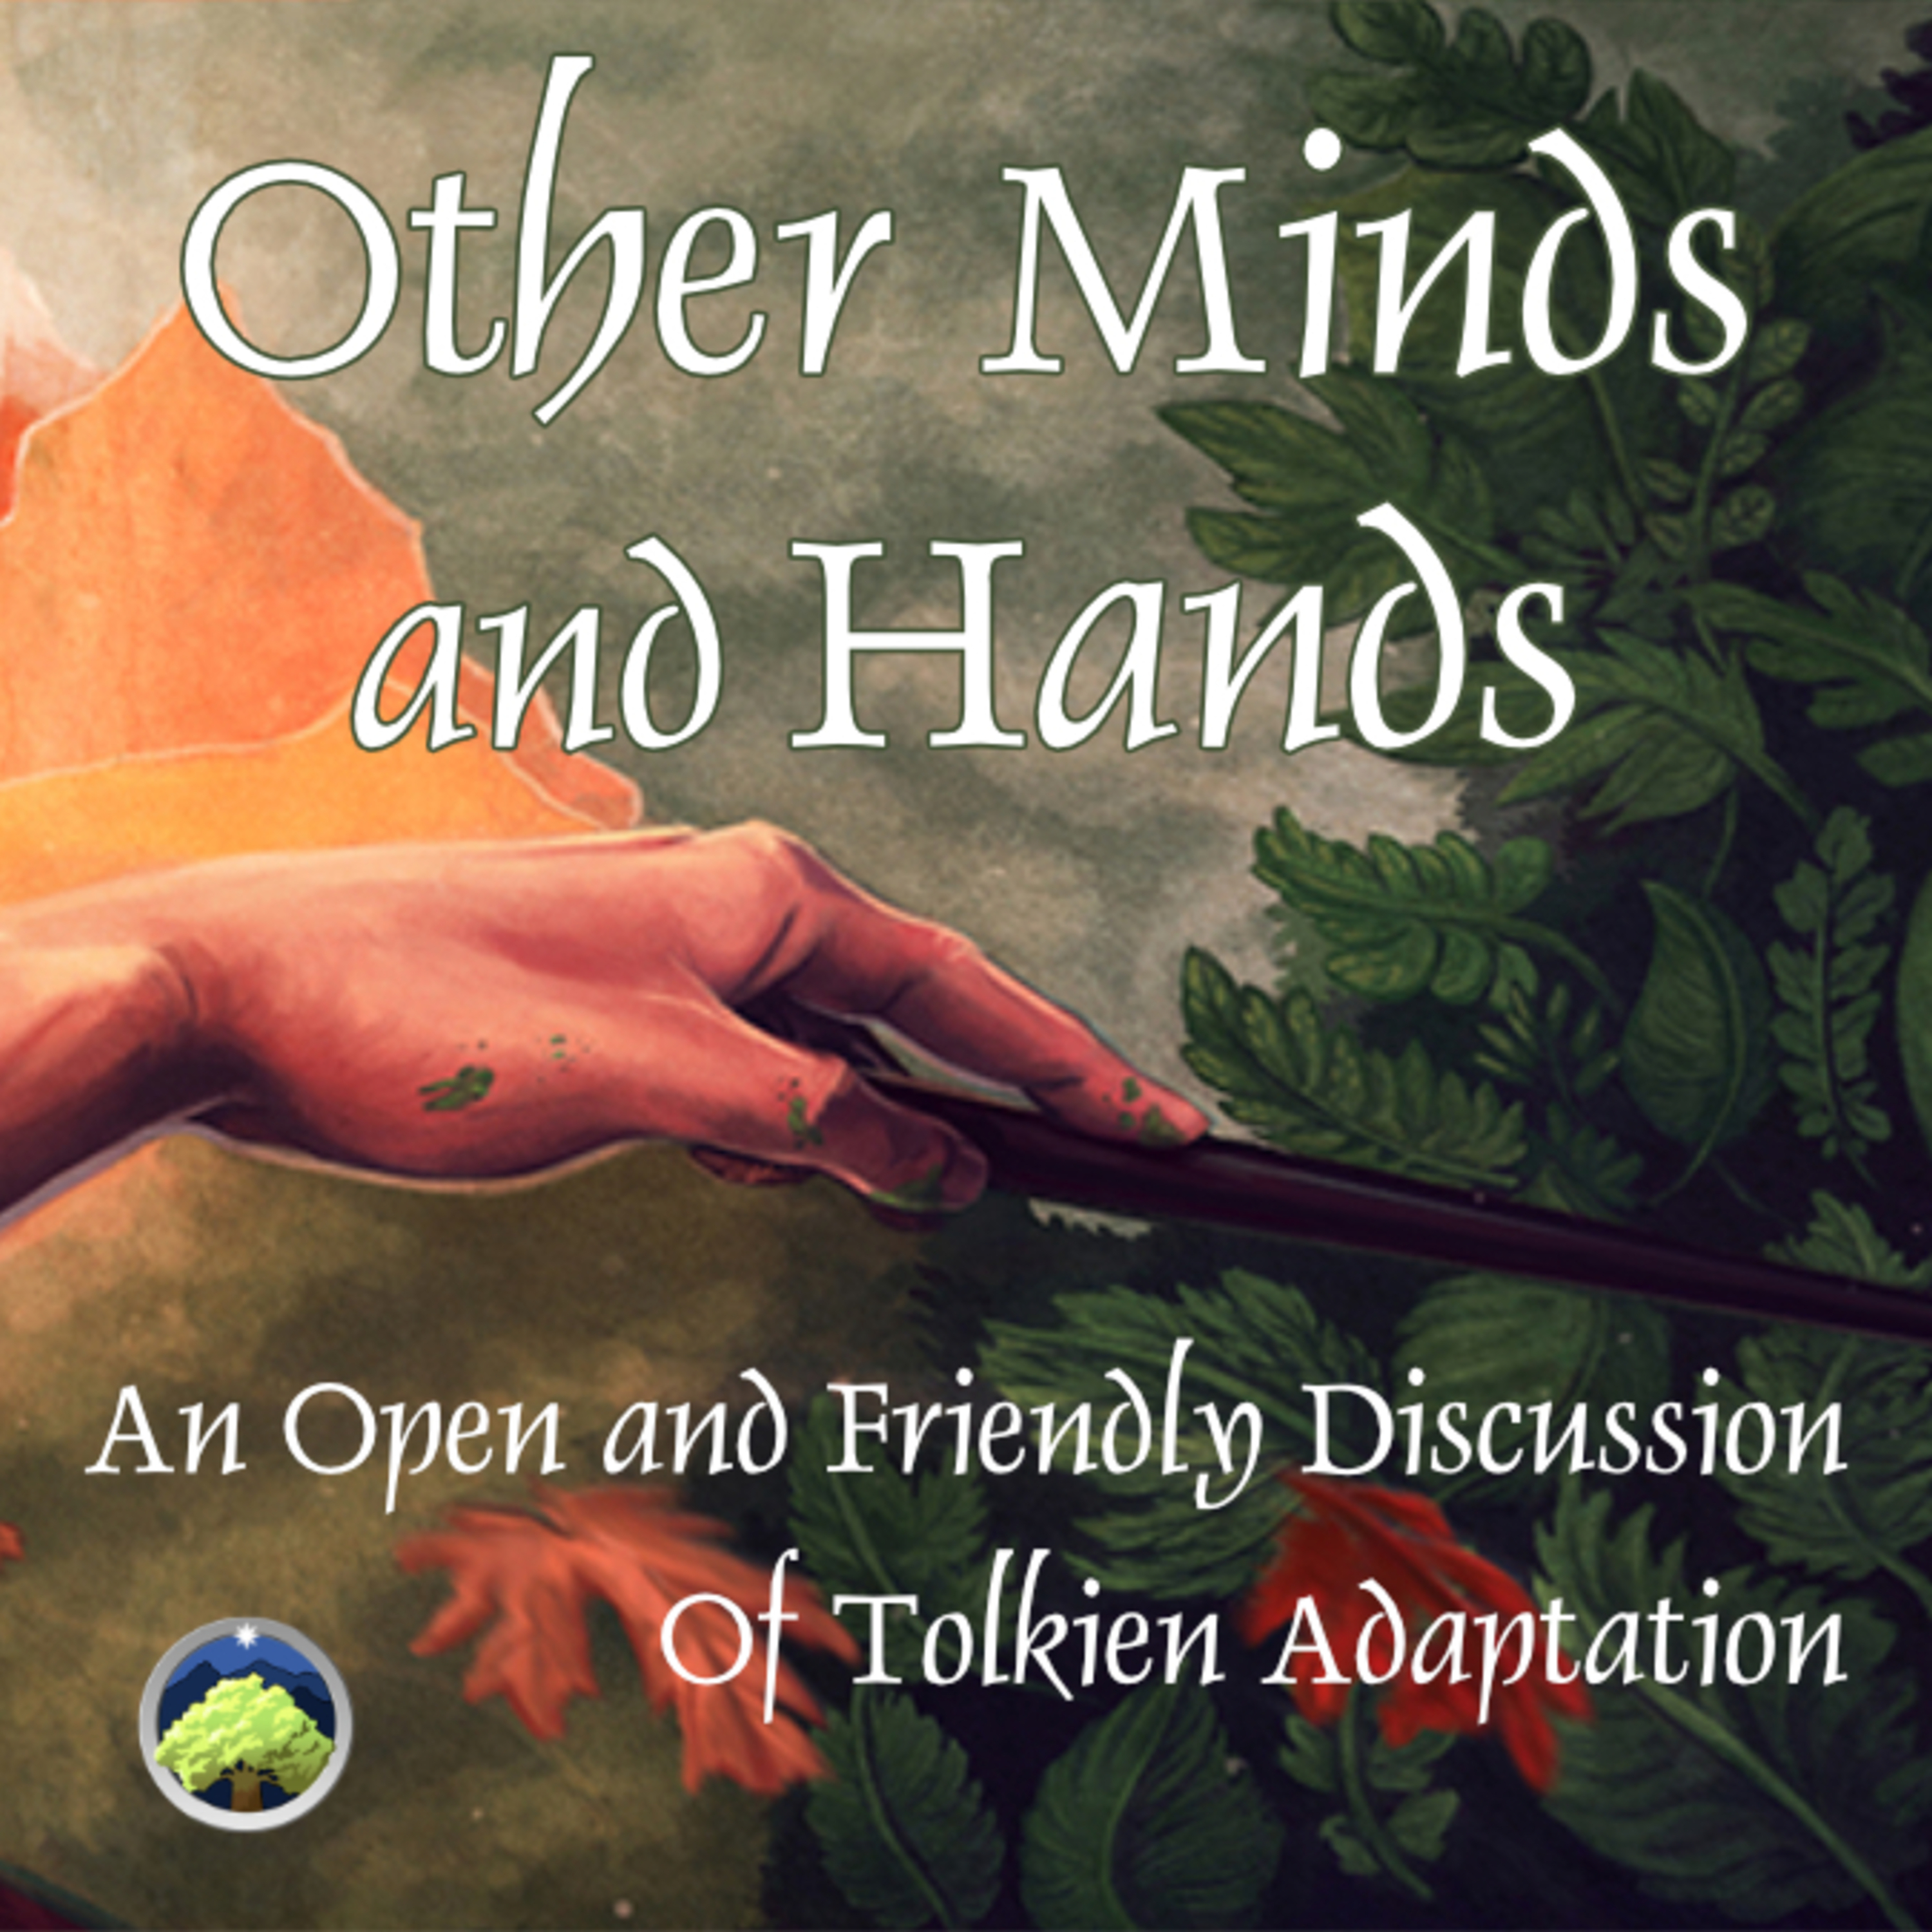 532: Other Minds and Hands, Episode 46